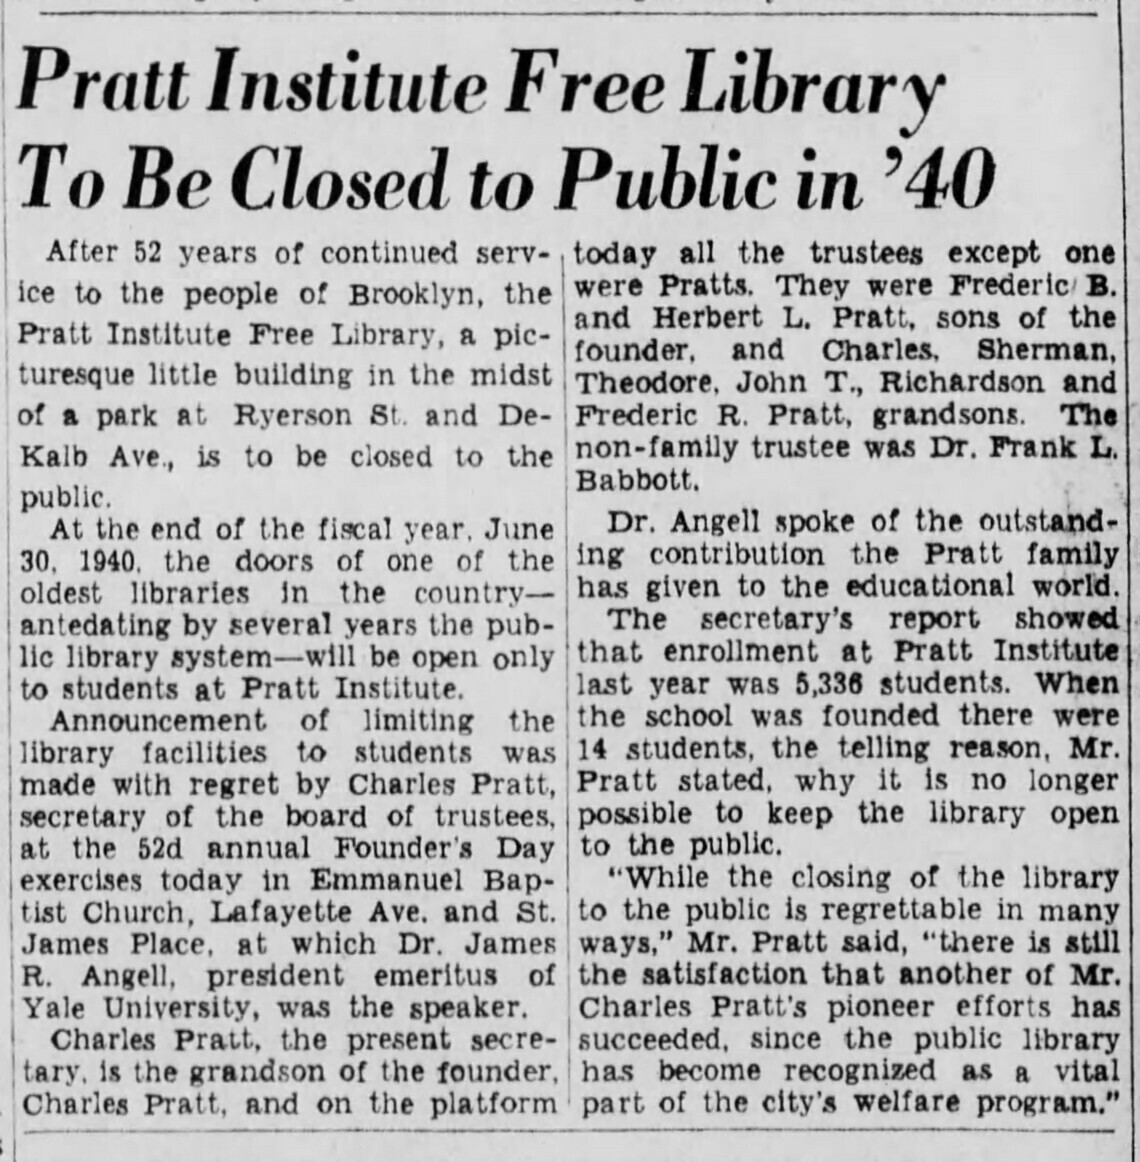 Pratt Institute Free Library to be Closed to the Public